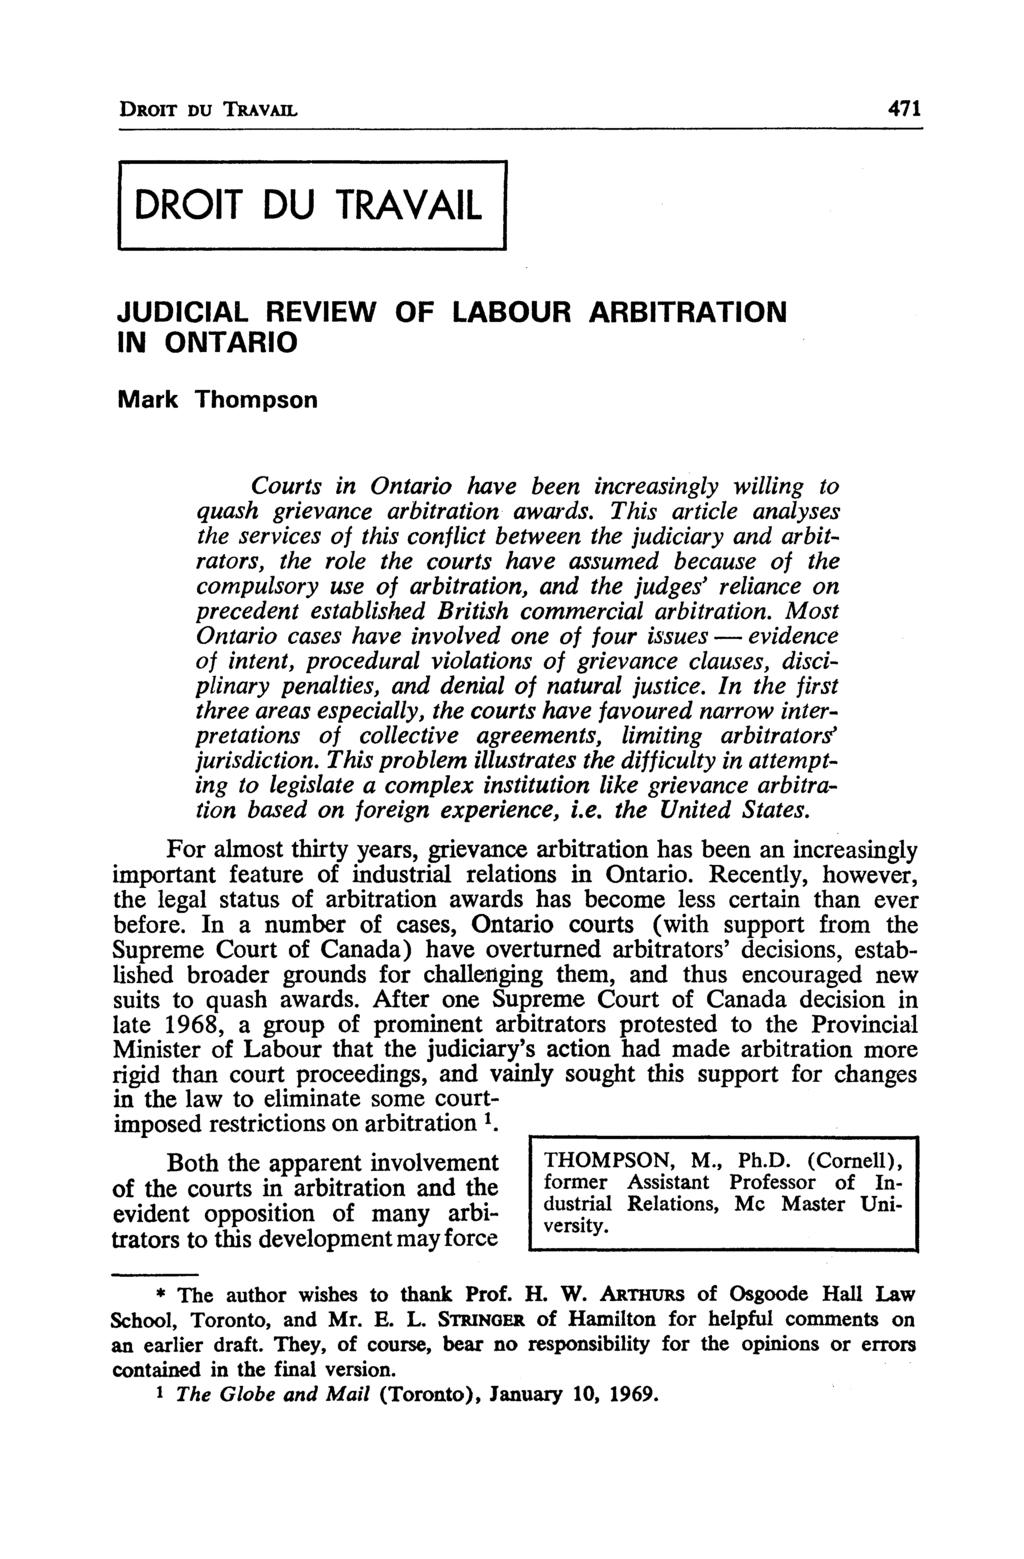 DROIT DU TRAVAIL 471 DROIT DU TRAVAIL JUDICIAL REVIEW OF LABOUR ARBITRATION IN ONTARIO Mark Thompson Courts in Ontario hâve been increasingly willing to quash grievance arbitration awards.